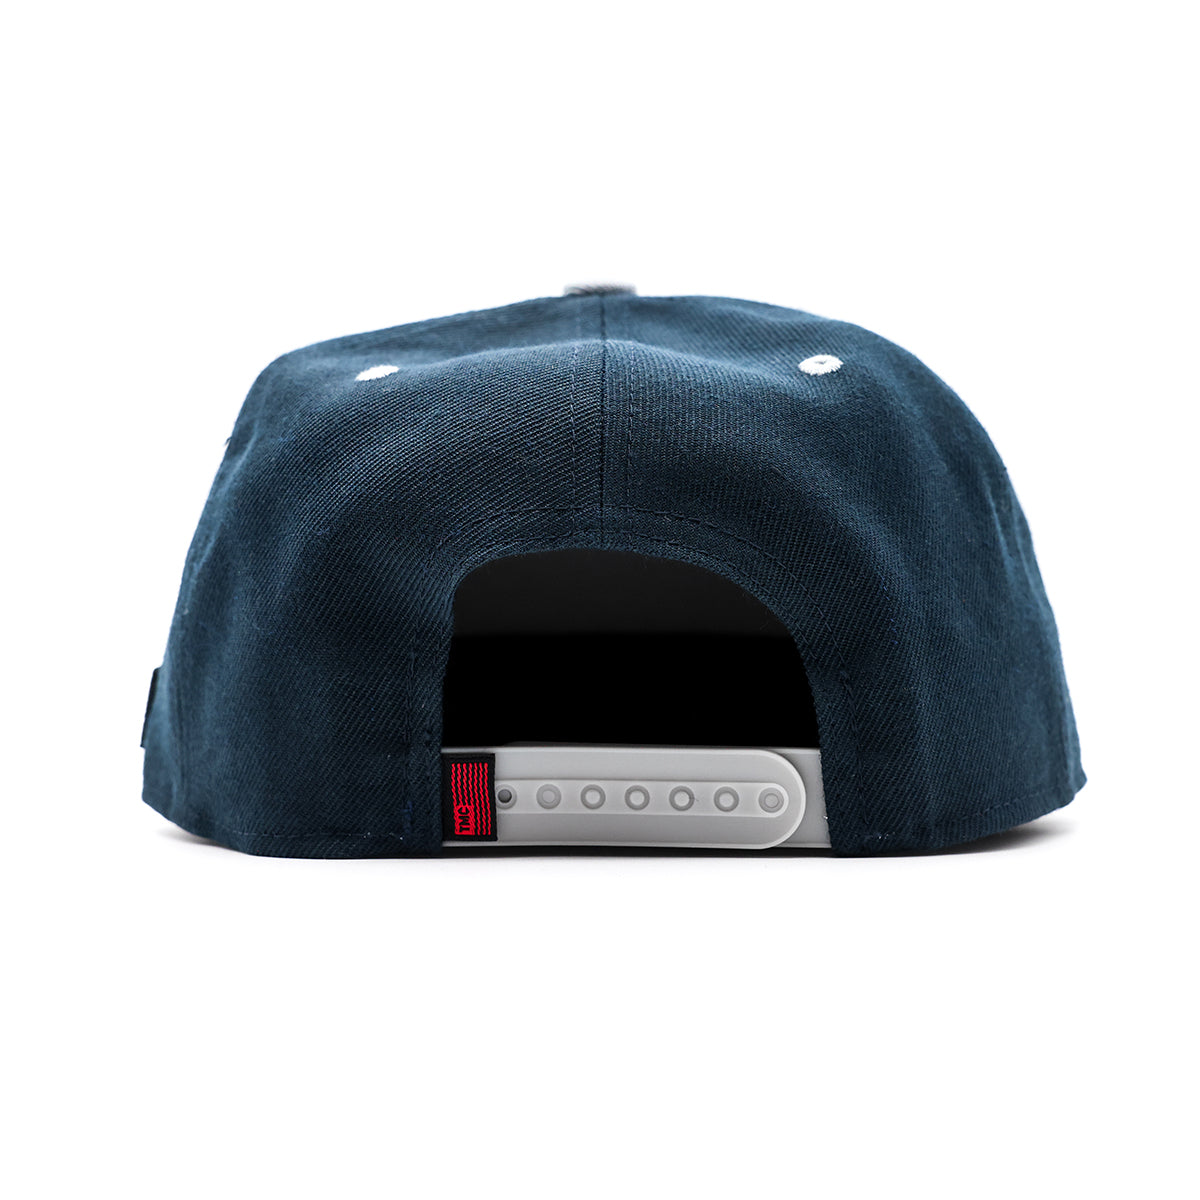 Crenshaw Limited Edition Snapback - Navy/Gray [Two-Tone] - Back